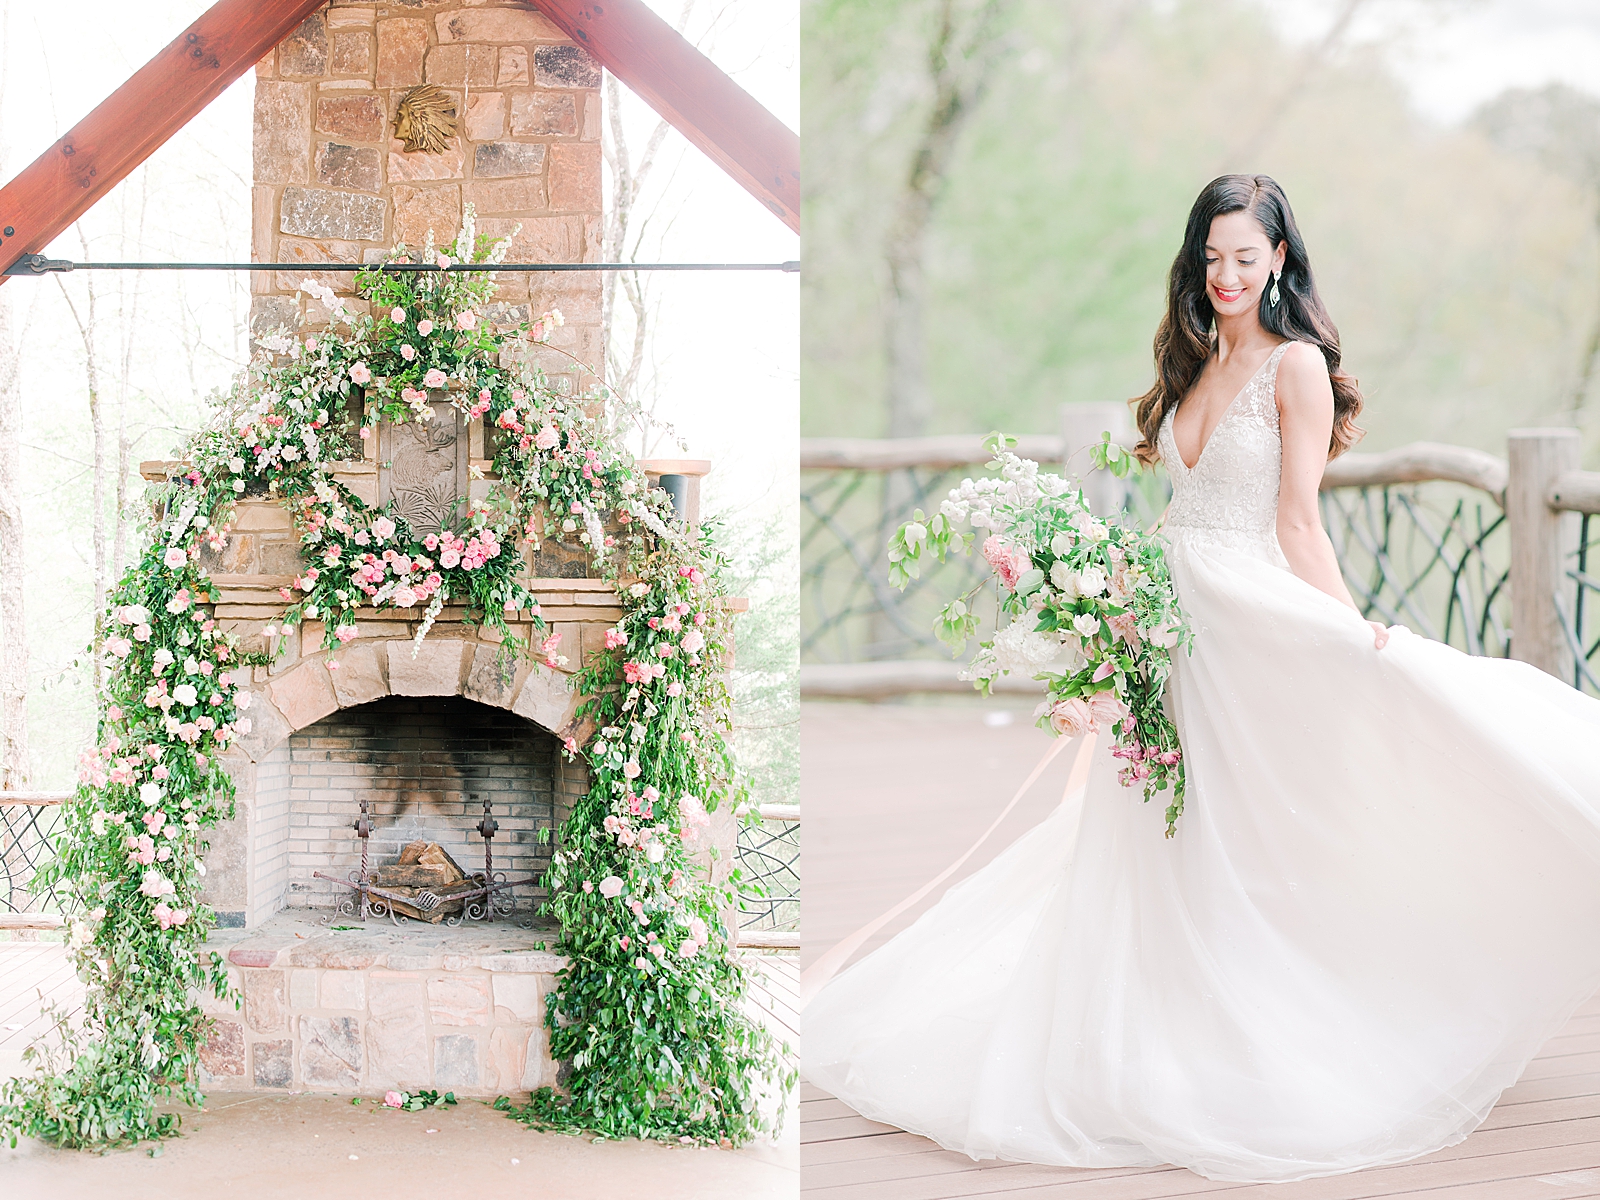 2400 On The River Spring Bridal Session Venue Pavilion fireplace and Lauren Twirling Photos